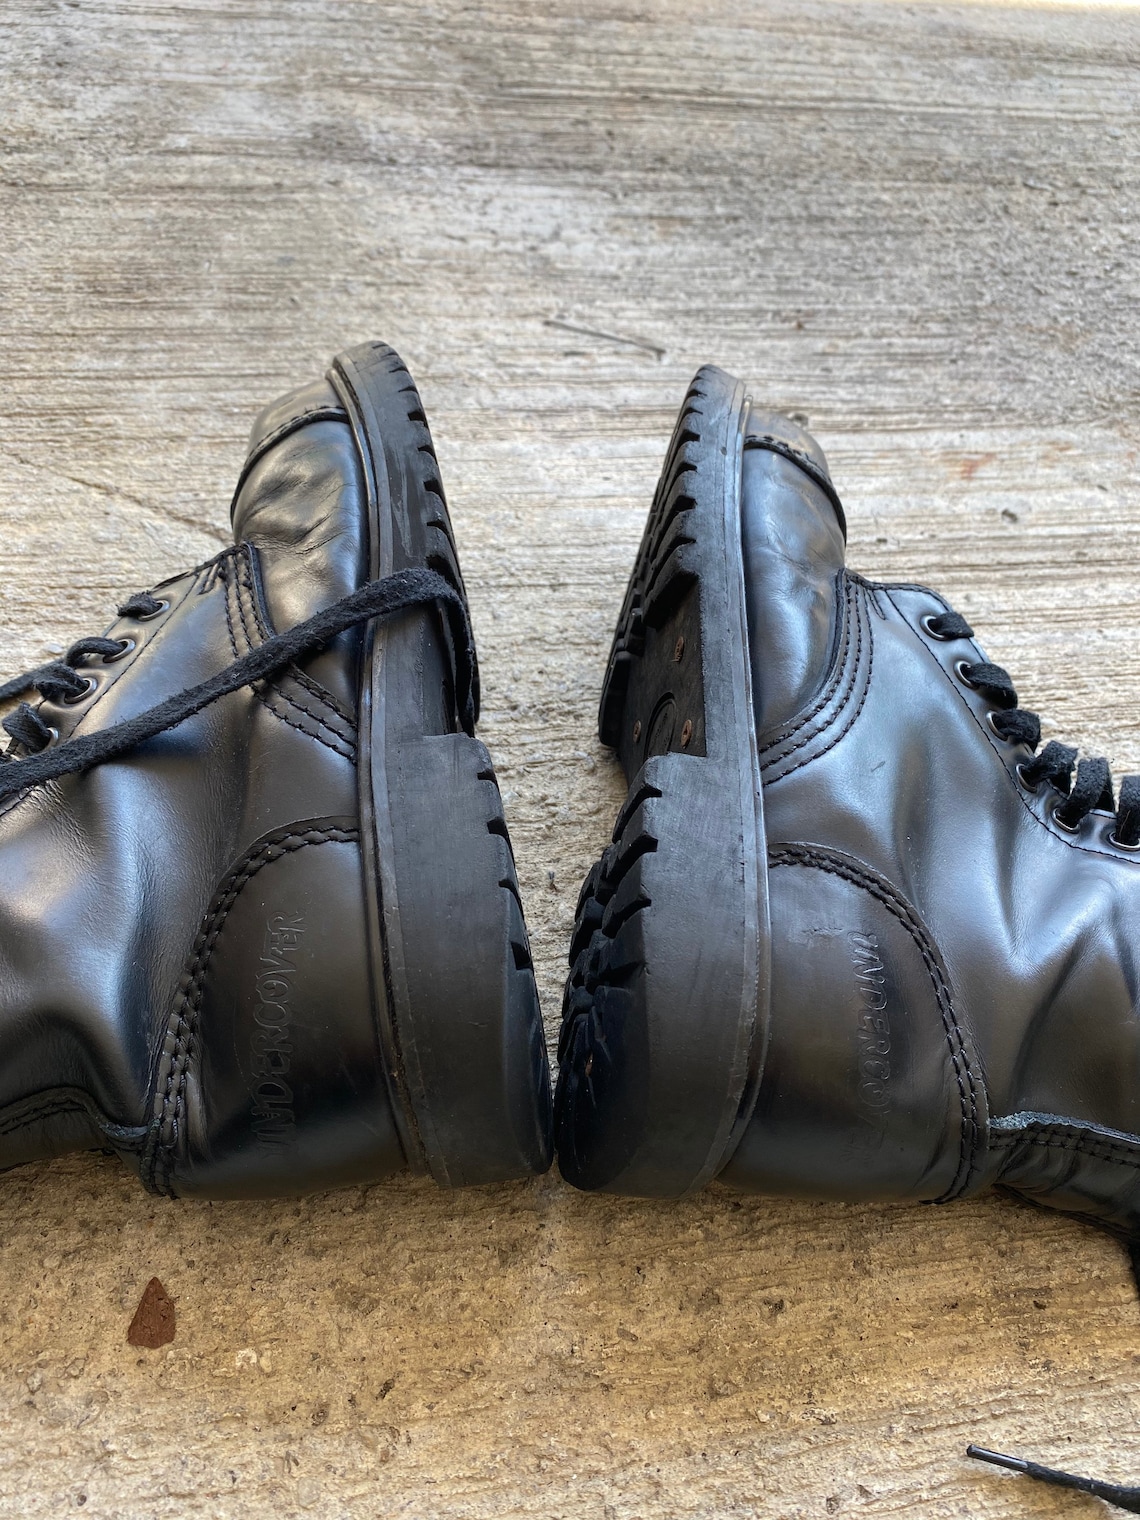 Undercover Combat Boots Black Steel Toe Size 7 | Etsy